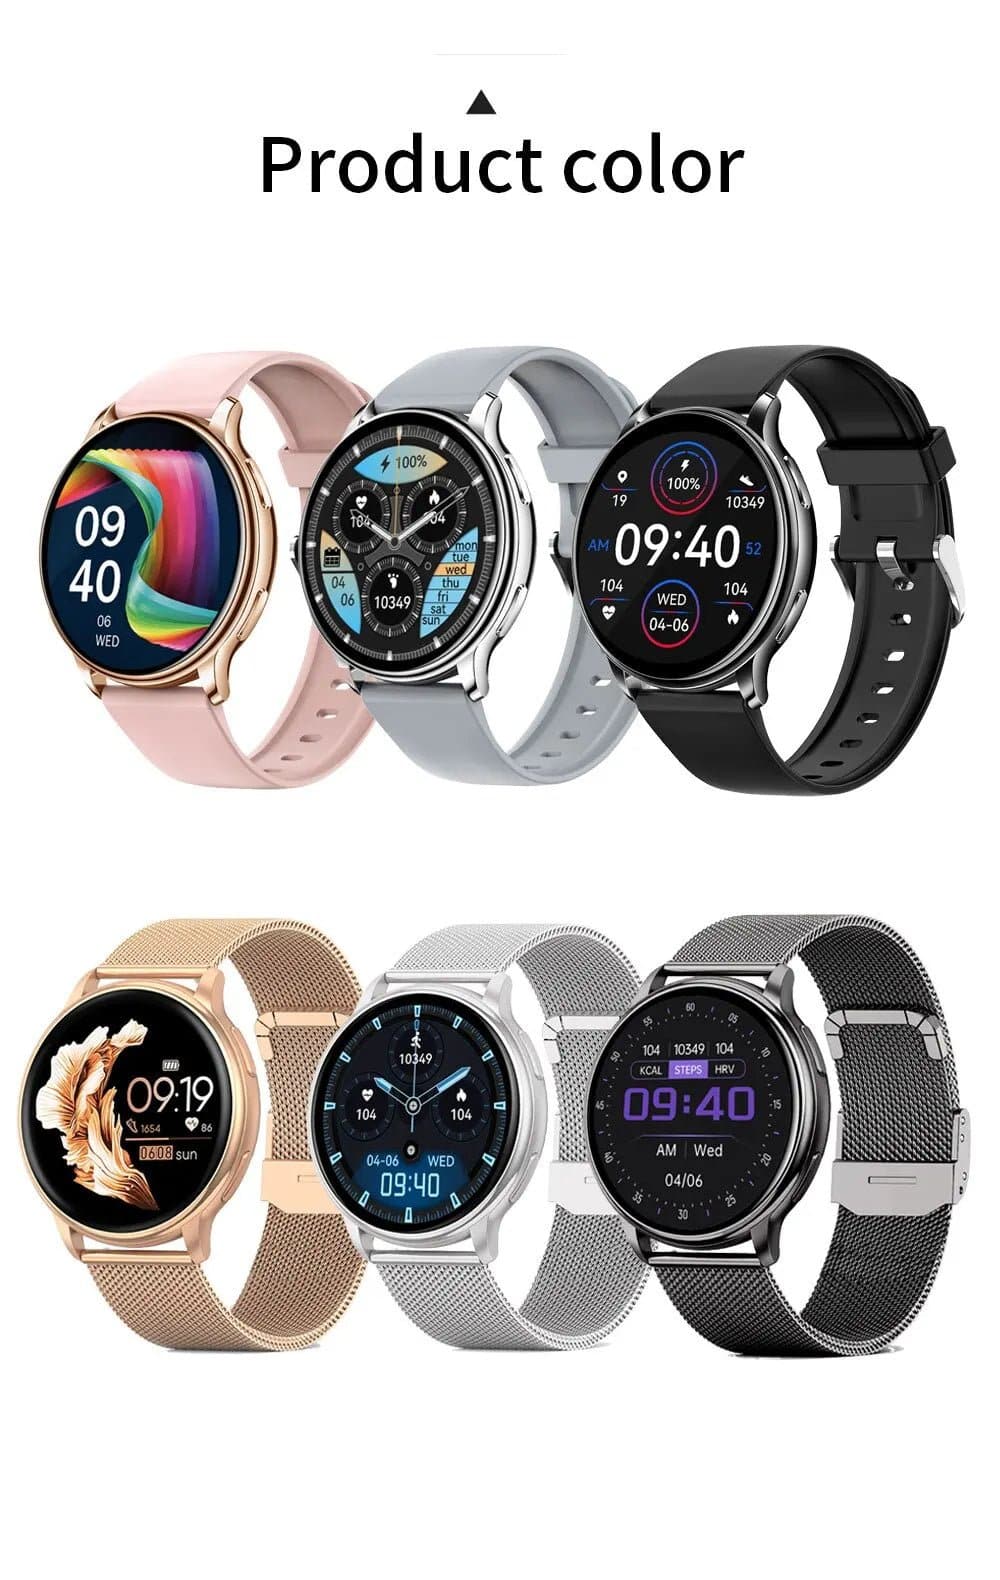 Fitness Tracker Smartwatch with Heart Rate Monitor, Sleep Tracker, and Blood Pressure Monitor - Wandering Woman